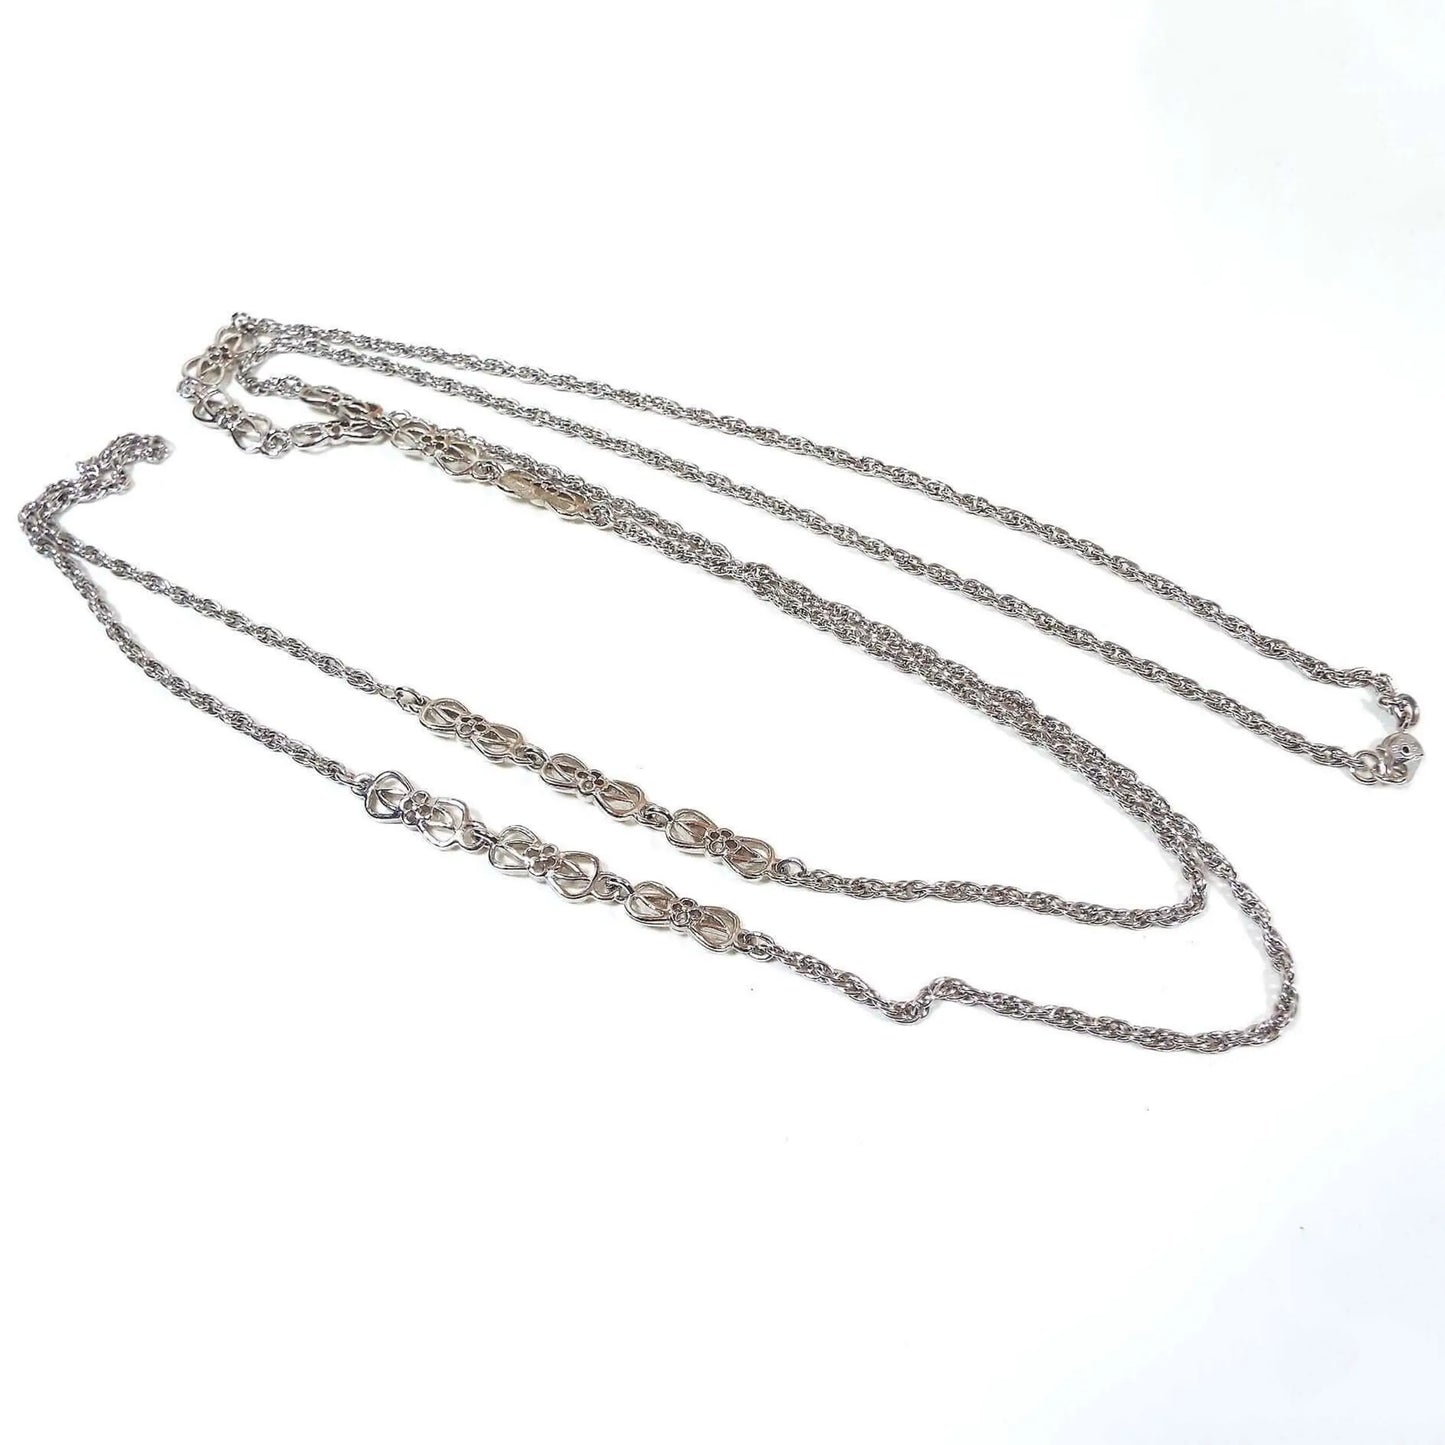 Top view of the retro vintage Monet chain necklace. The metal is silver tone in color. It has a long rope chain with two sets of spaced apart fancy links on each side for a total of 4 sets of fancy links. The fancy links are shaped like an open bow tie with an elongated open diamond shape inside that and then finally a small flower in the middle with four open petals. There is a hinged clip clasp on the end.